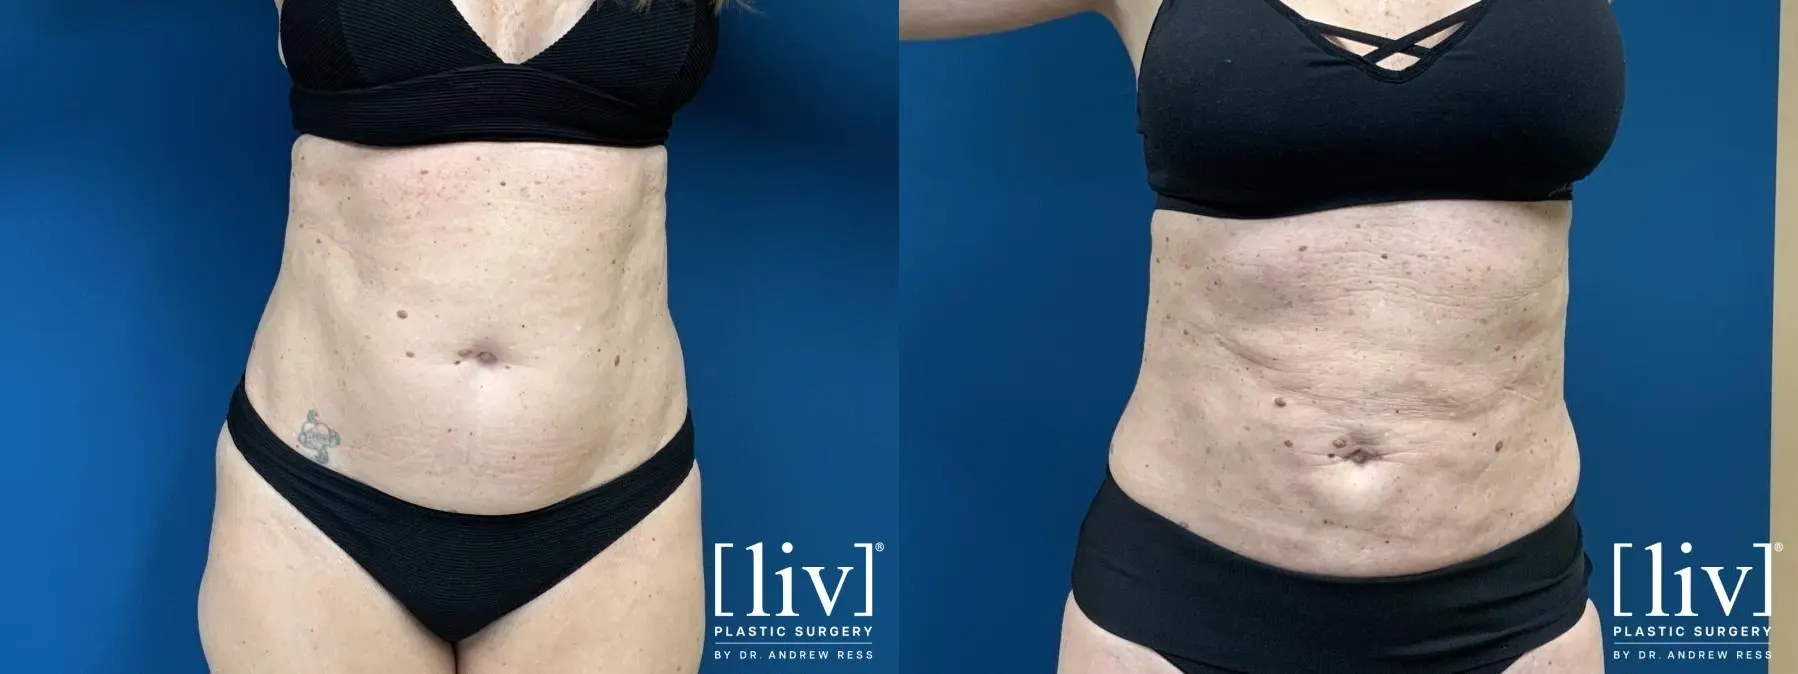 Liposuction: Patient 6 - Before and After 5